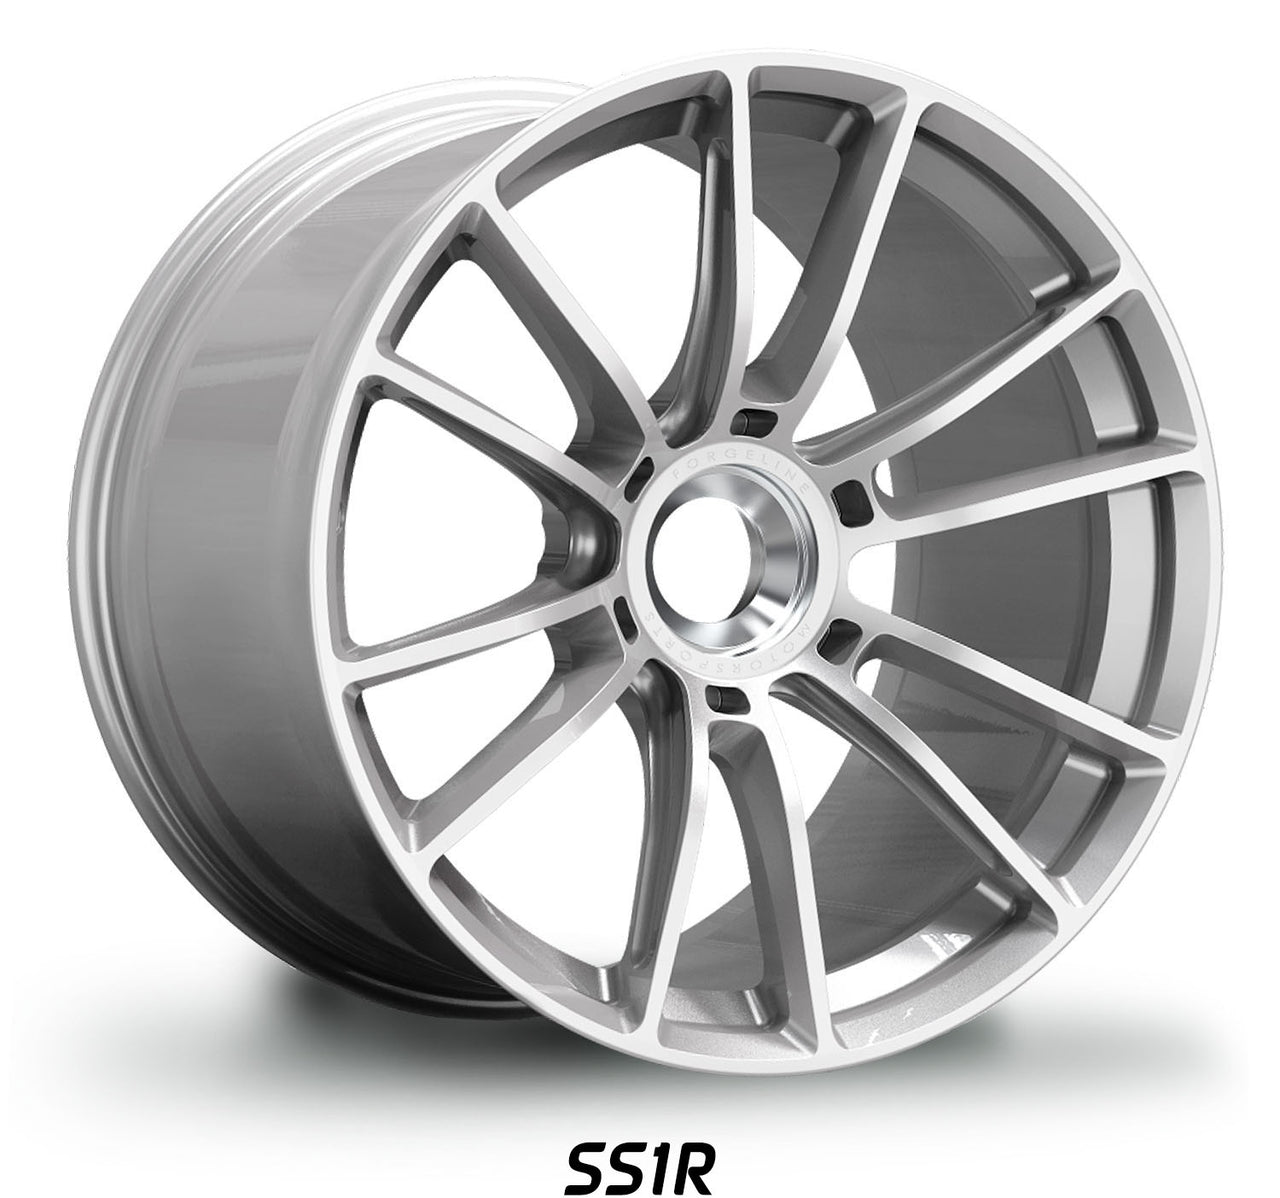 Hyper Silver Forgeline SS1R wheel for Porsche 992 GT3 RS the best forged motorsports wheels